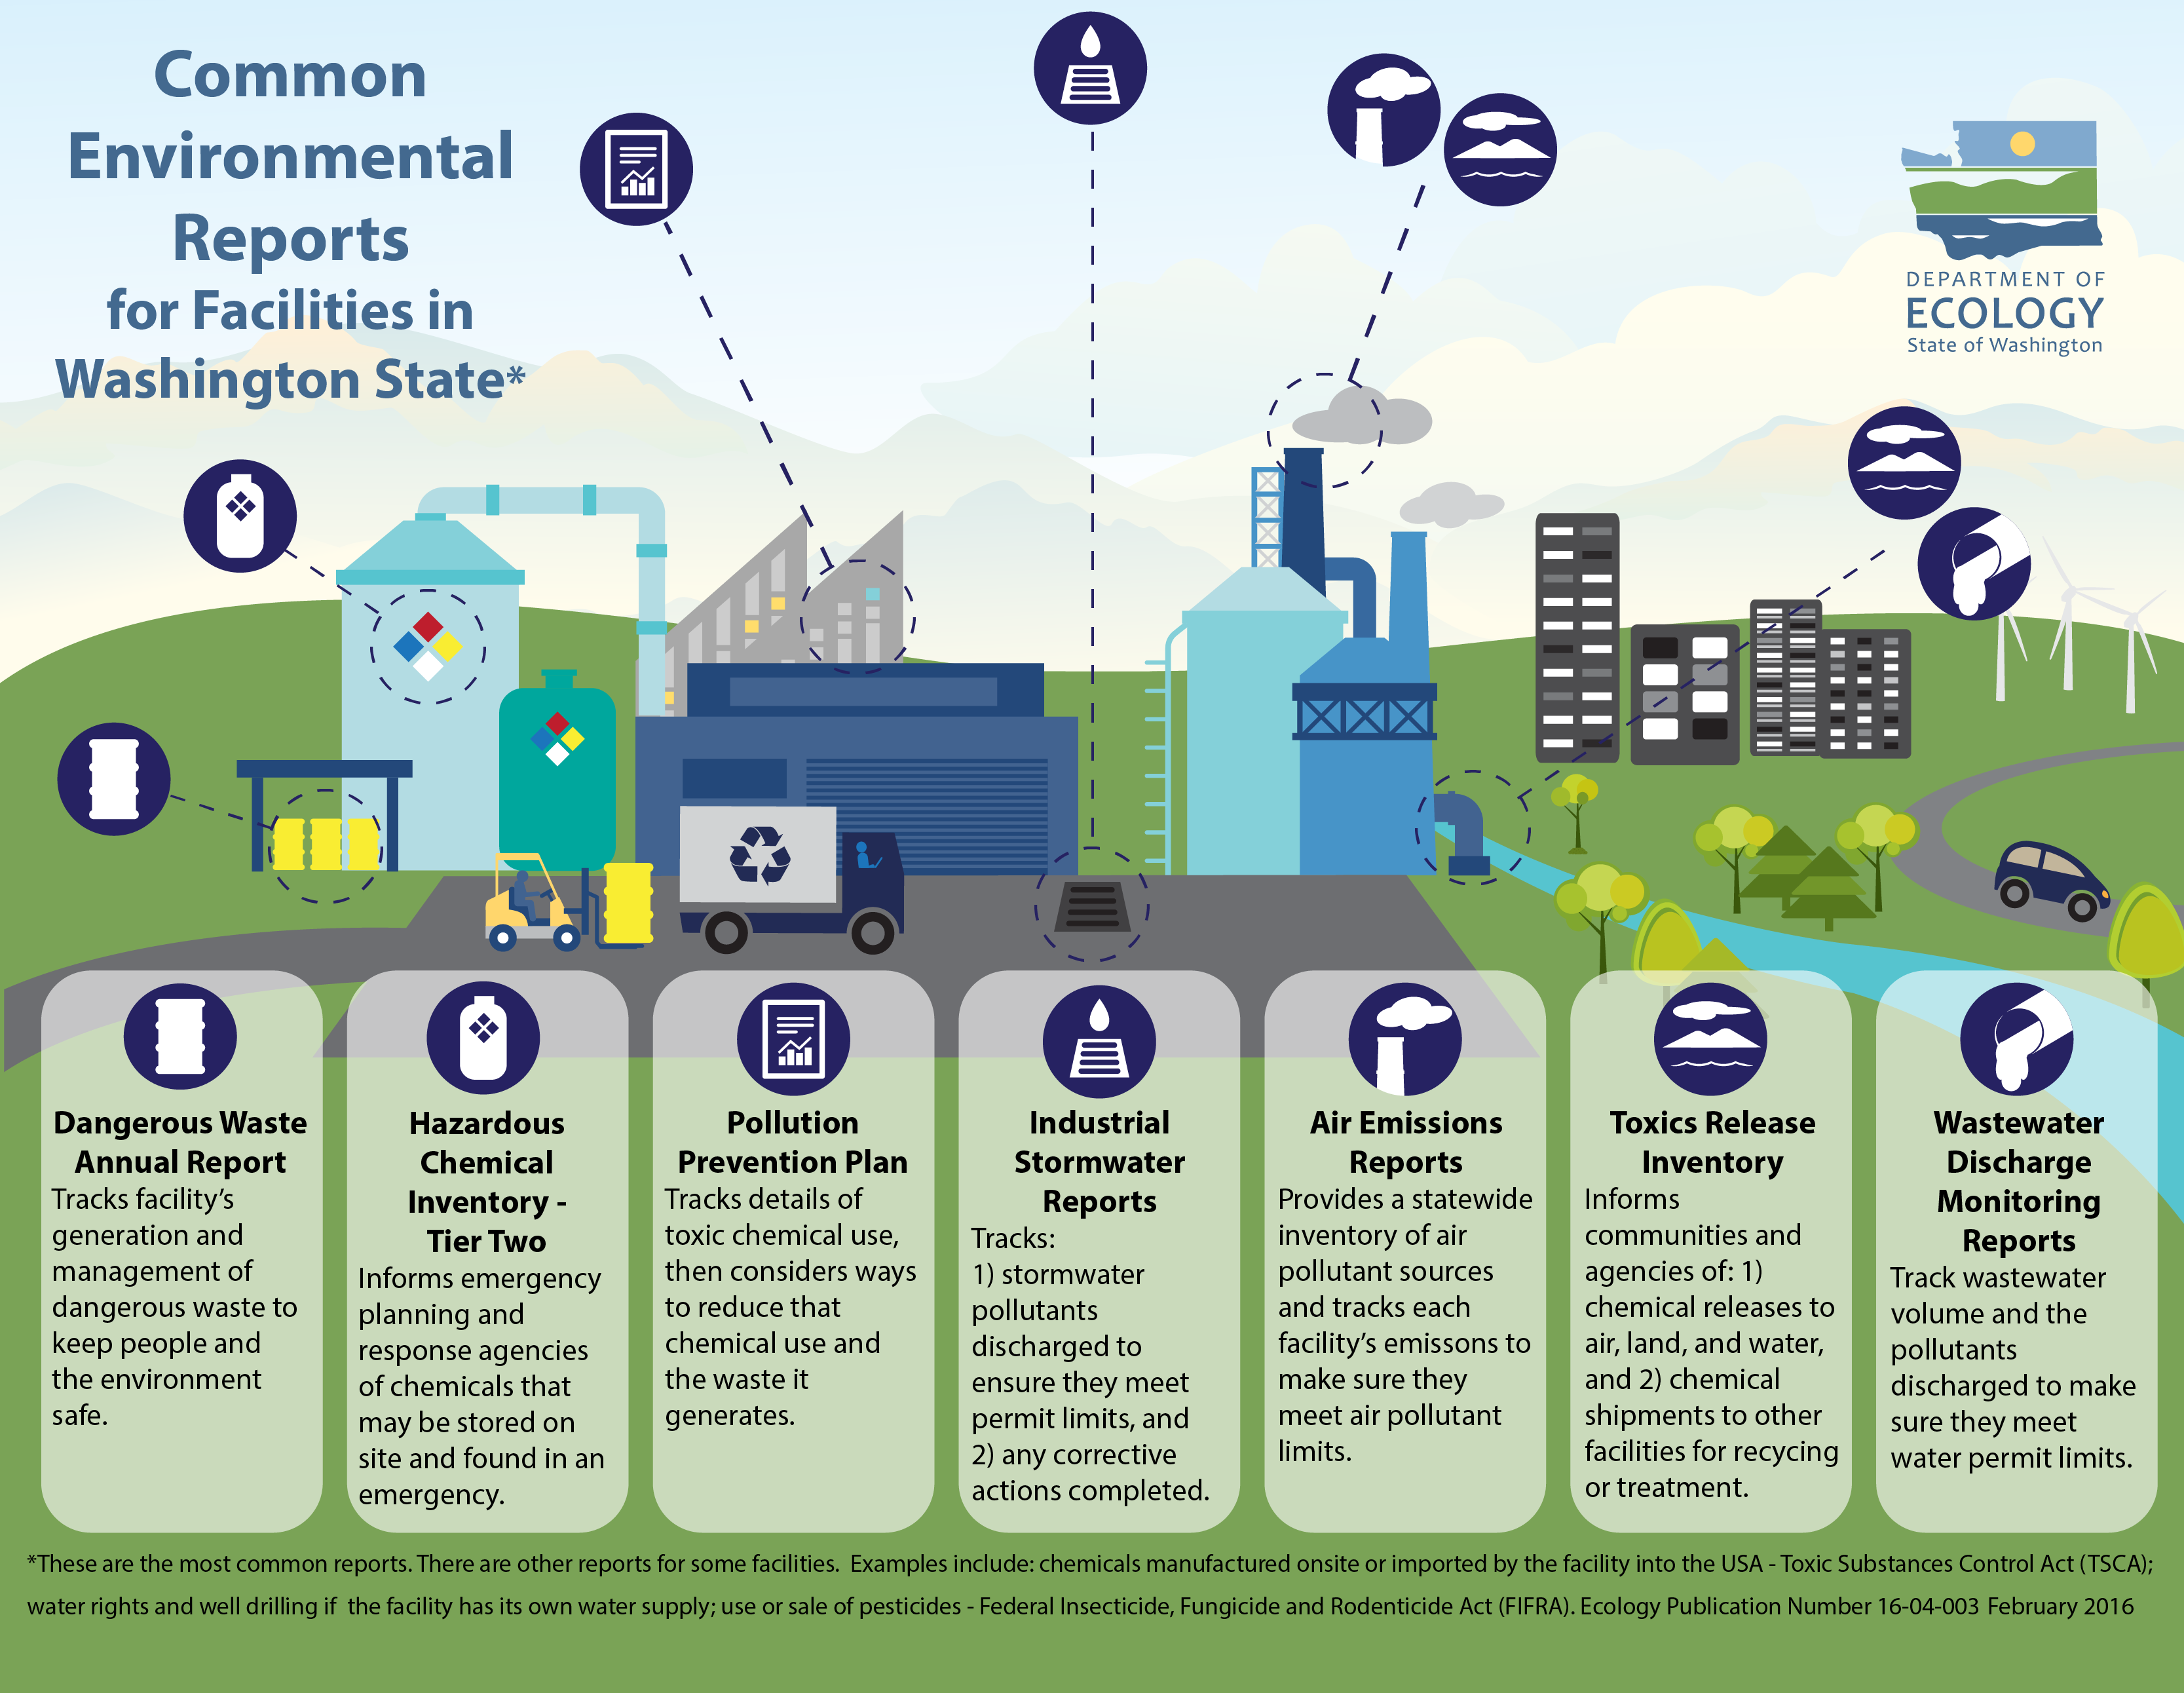 Common Environmental Reports for Facilities in Washington State poster. Click image to download or request a copy.